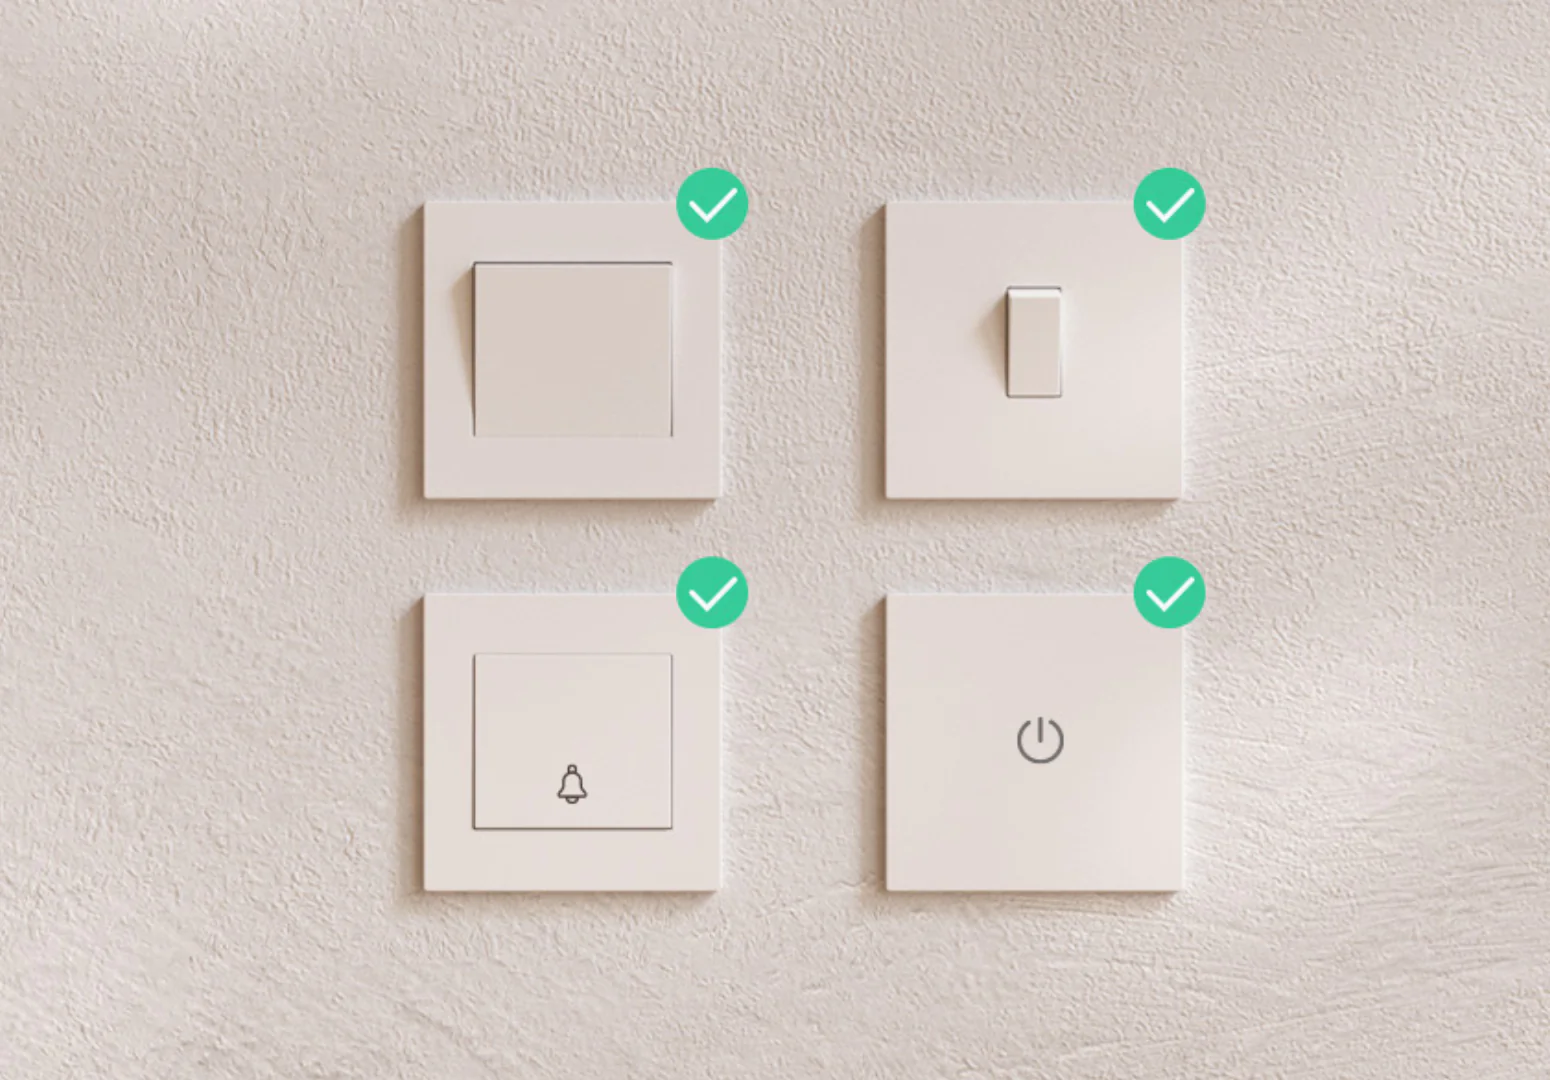 2 1679454088701 Meross Smart Wi-Fi In-Wall Switch X5 Kit Single Pole WiFi Wall Switch, Needs Neutral Wire, Compatible with Alexa, Google Assistant and SmartThings, Remote Control, Schedules, No Hub Needed